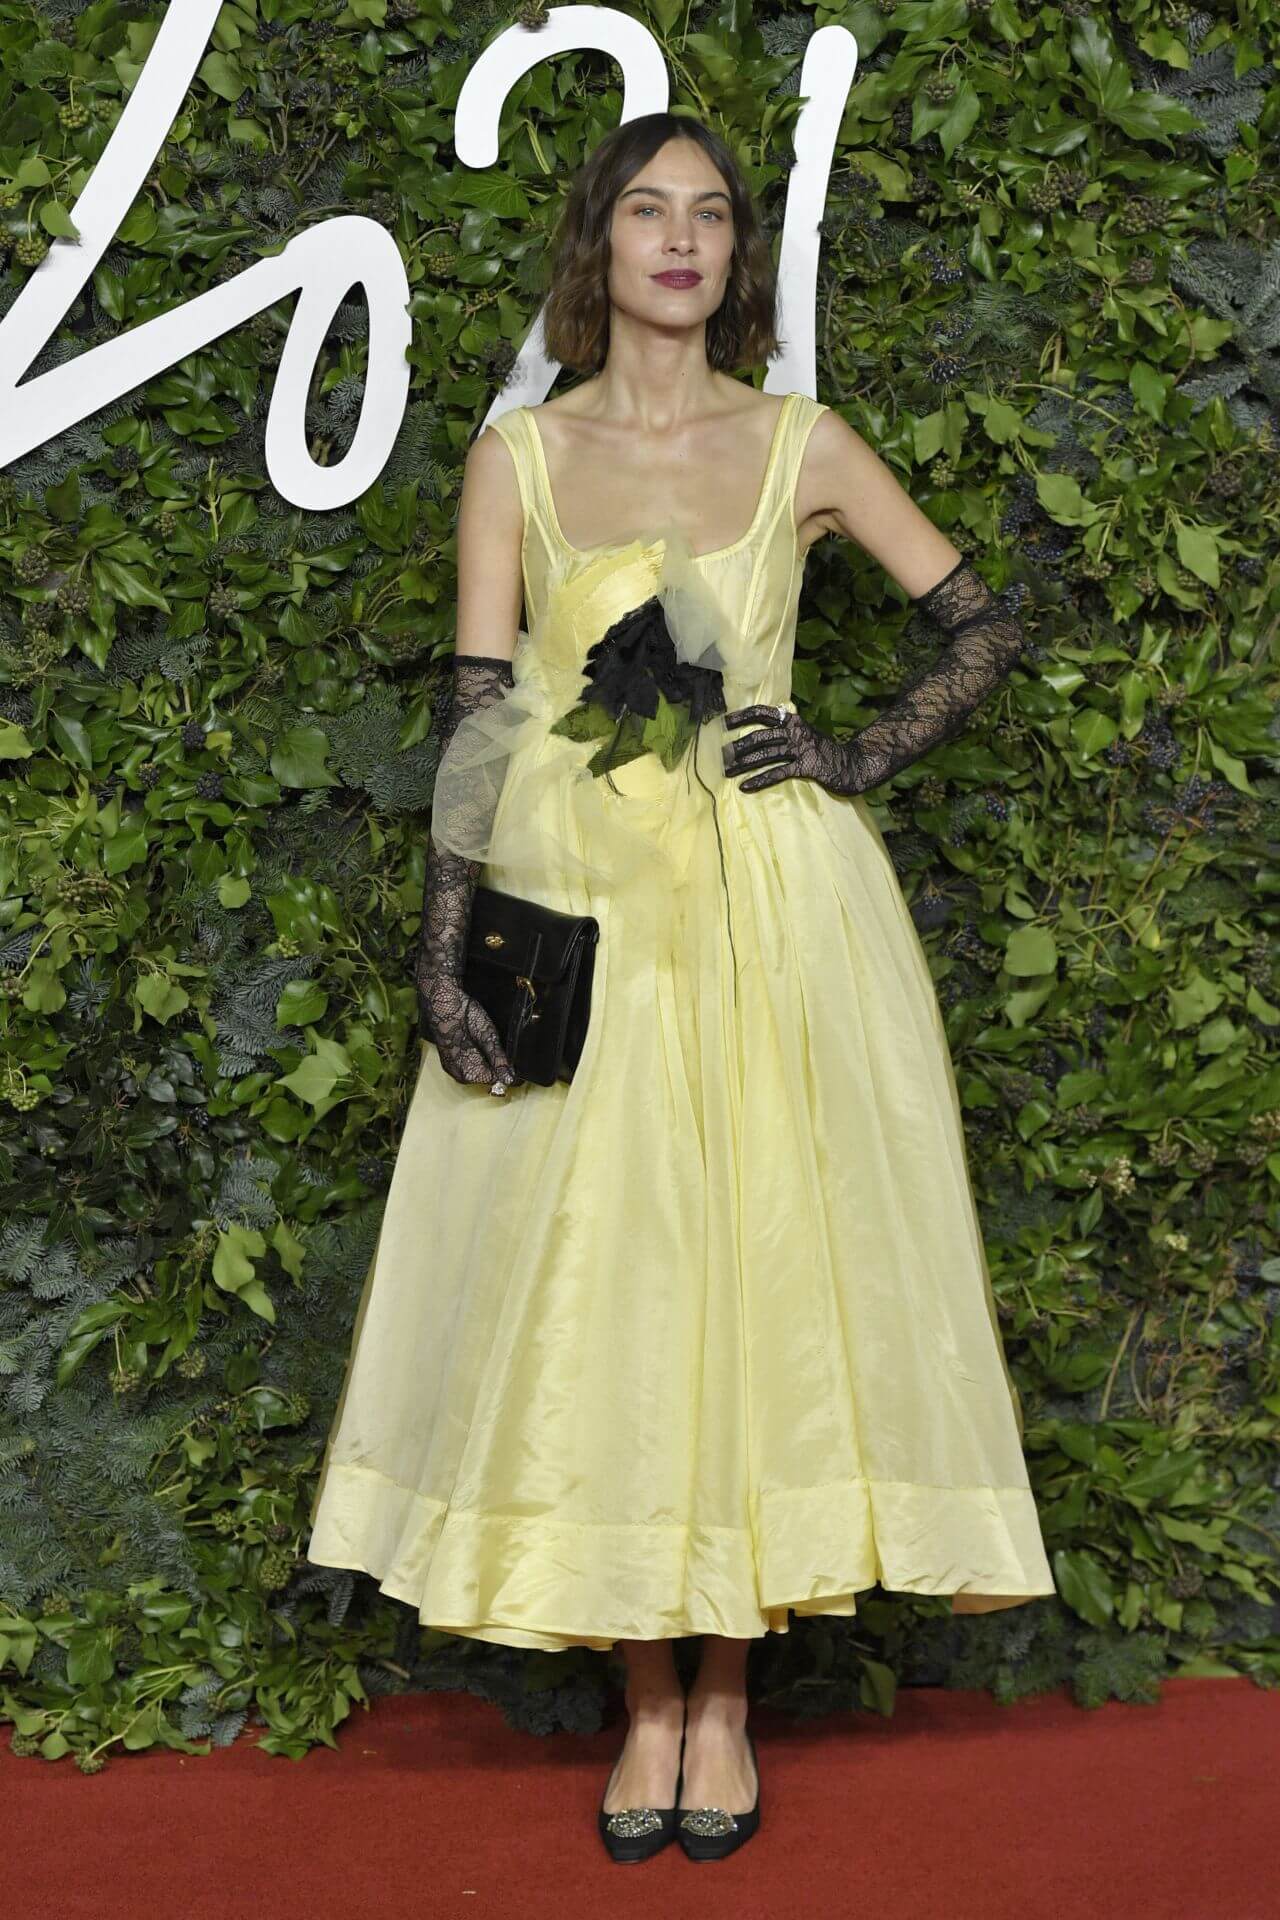 Alexa Chung wears looks like yellow Gown outfit at Fashion Awards 